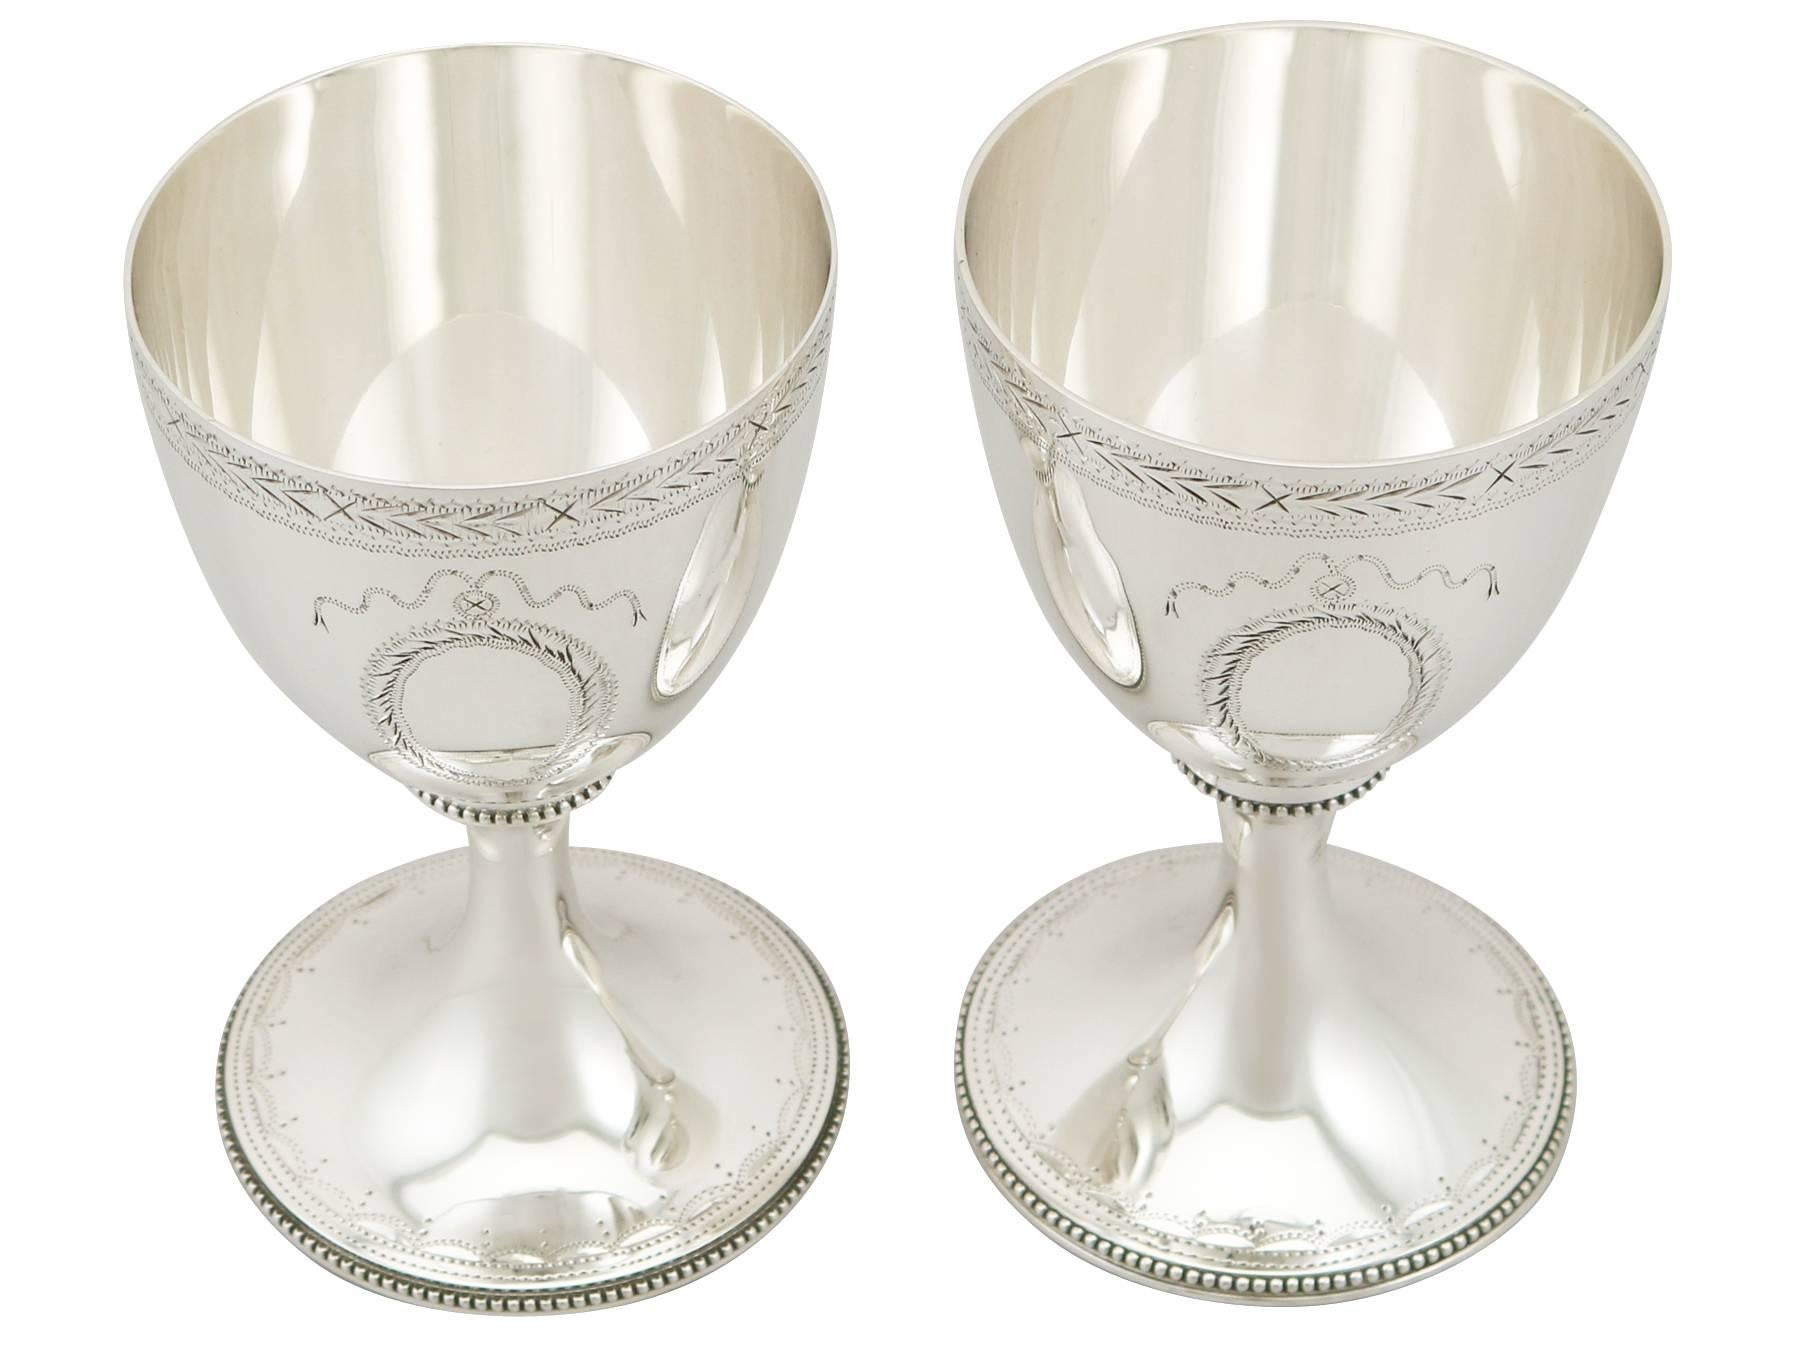 An exceptional, fine and impressive pair of vintage English sterling silver goblets; an addition to our range of wine and drink related silverware.

These exceptional vintage Elizabeth II sterling silver drinking goblets have a plain circular bell